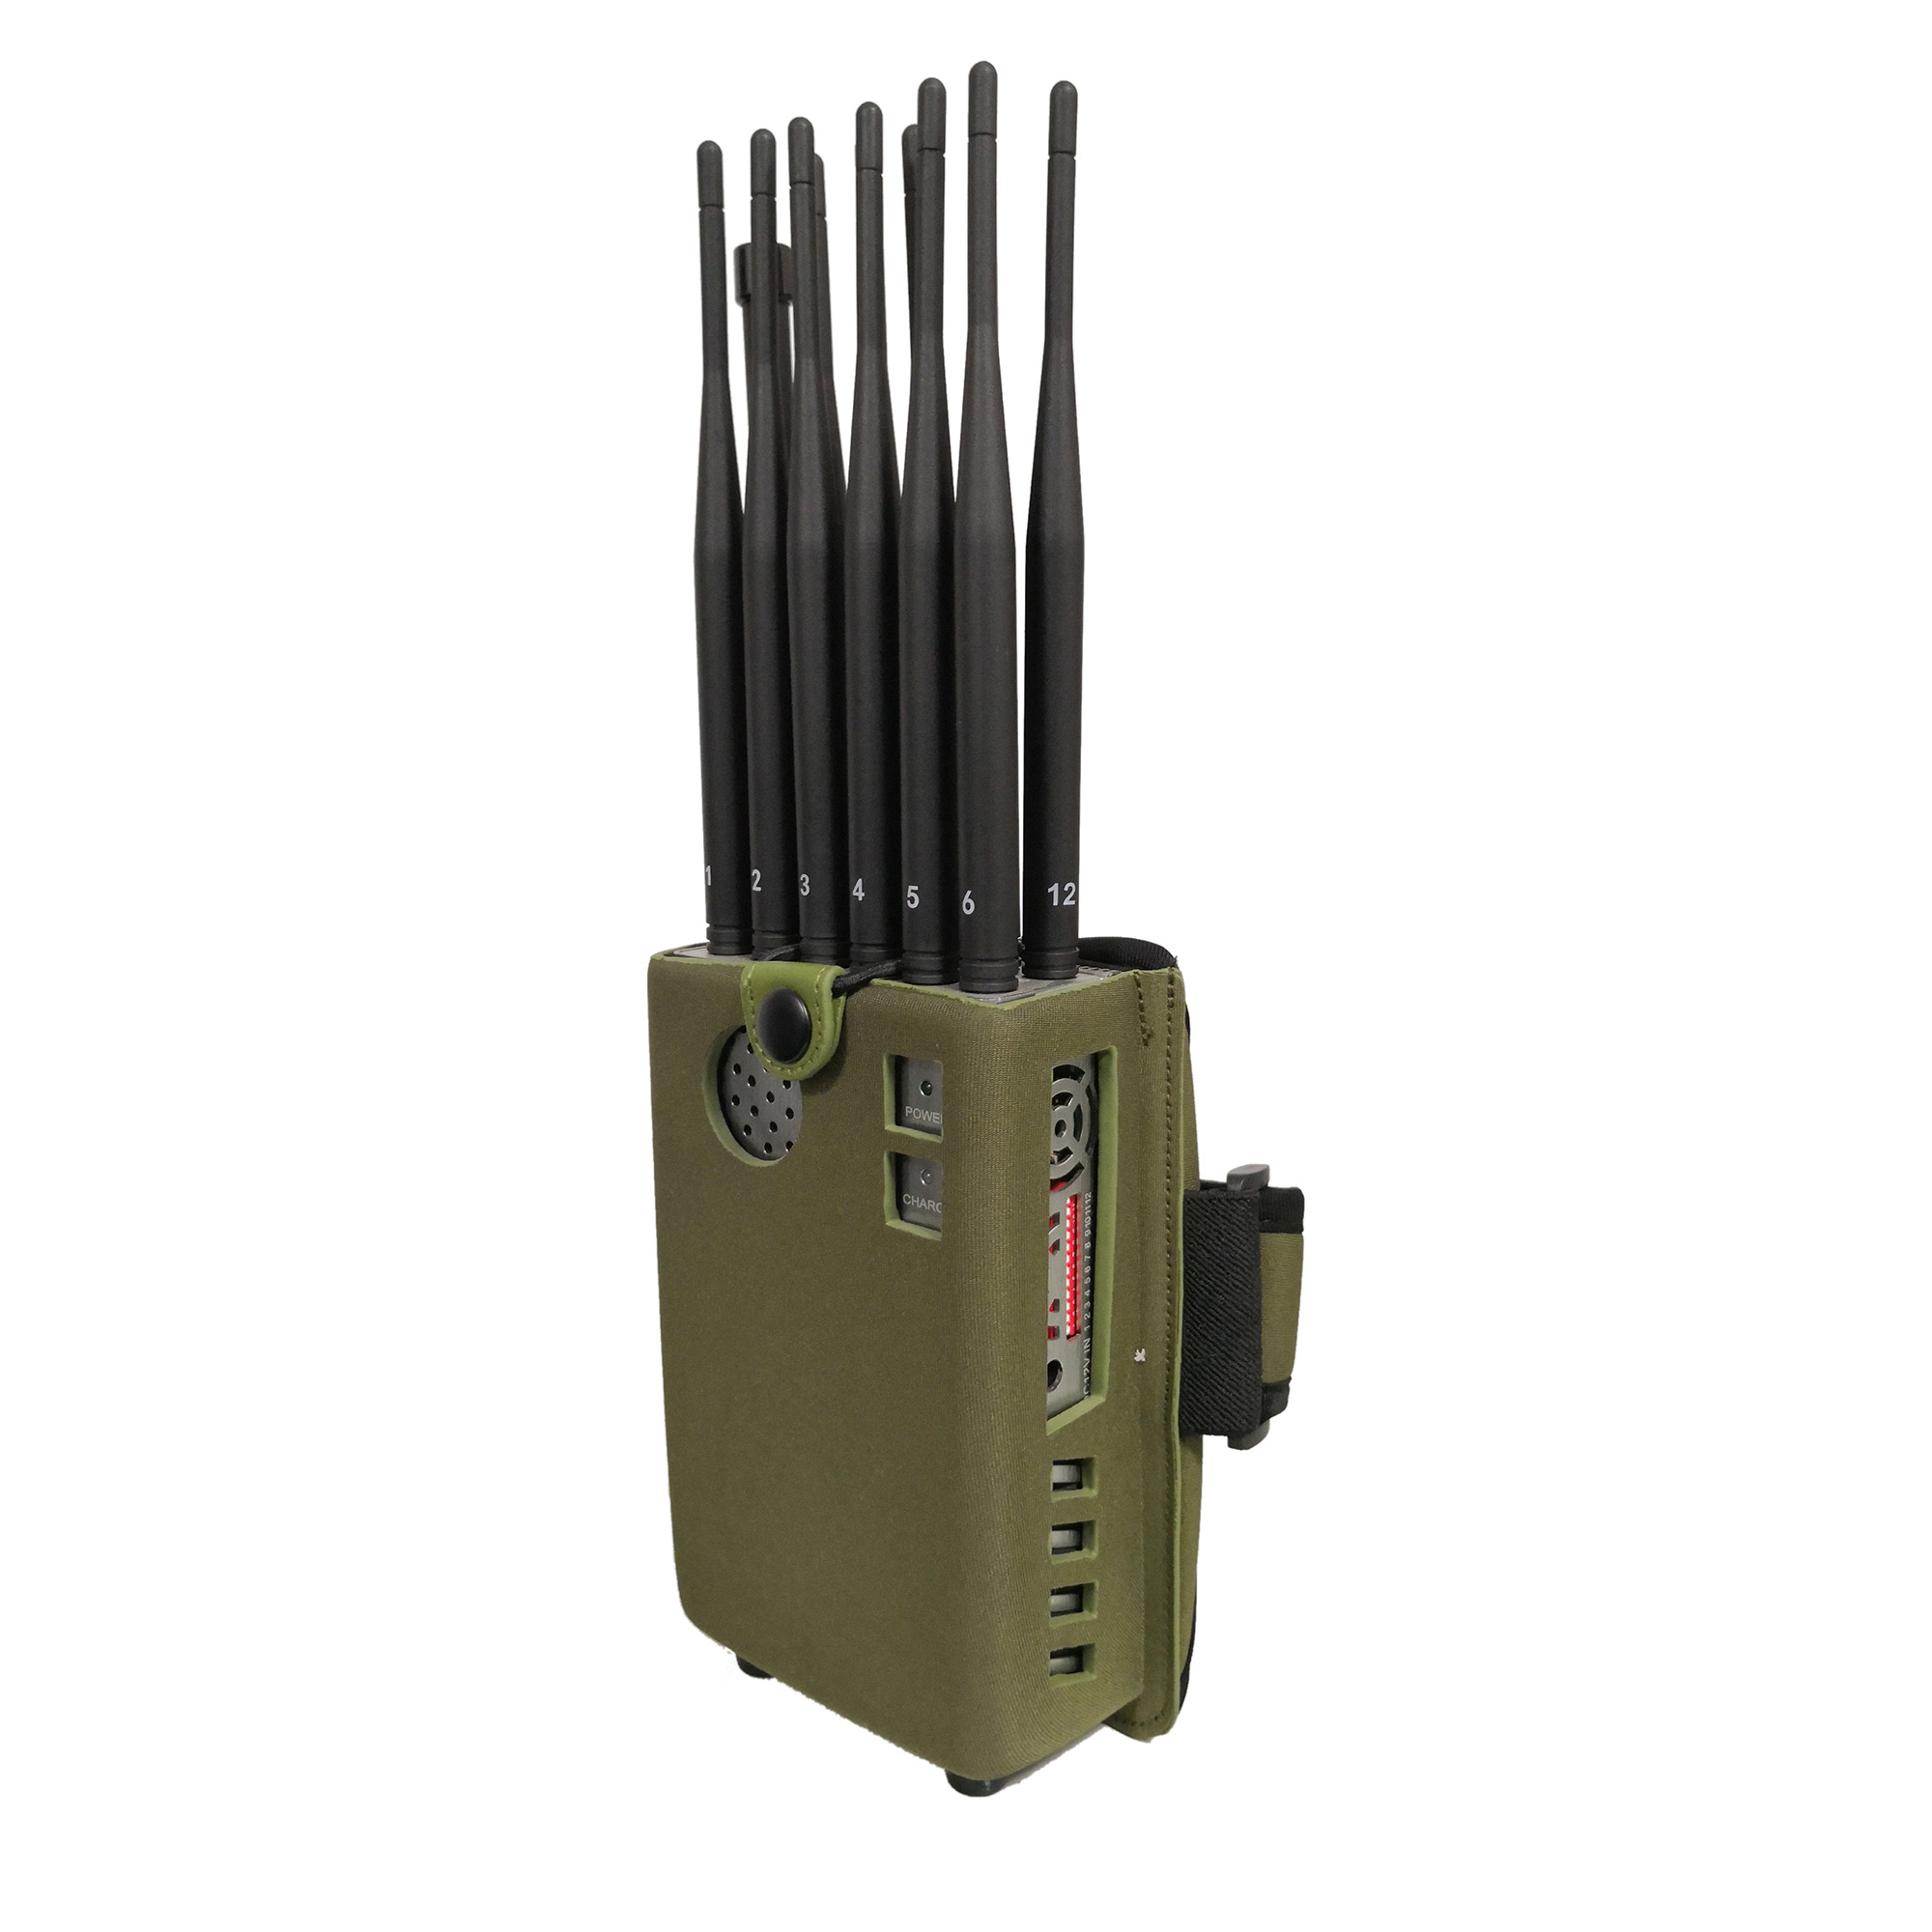 signal jammer for wireless